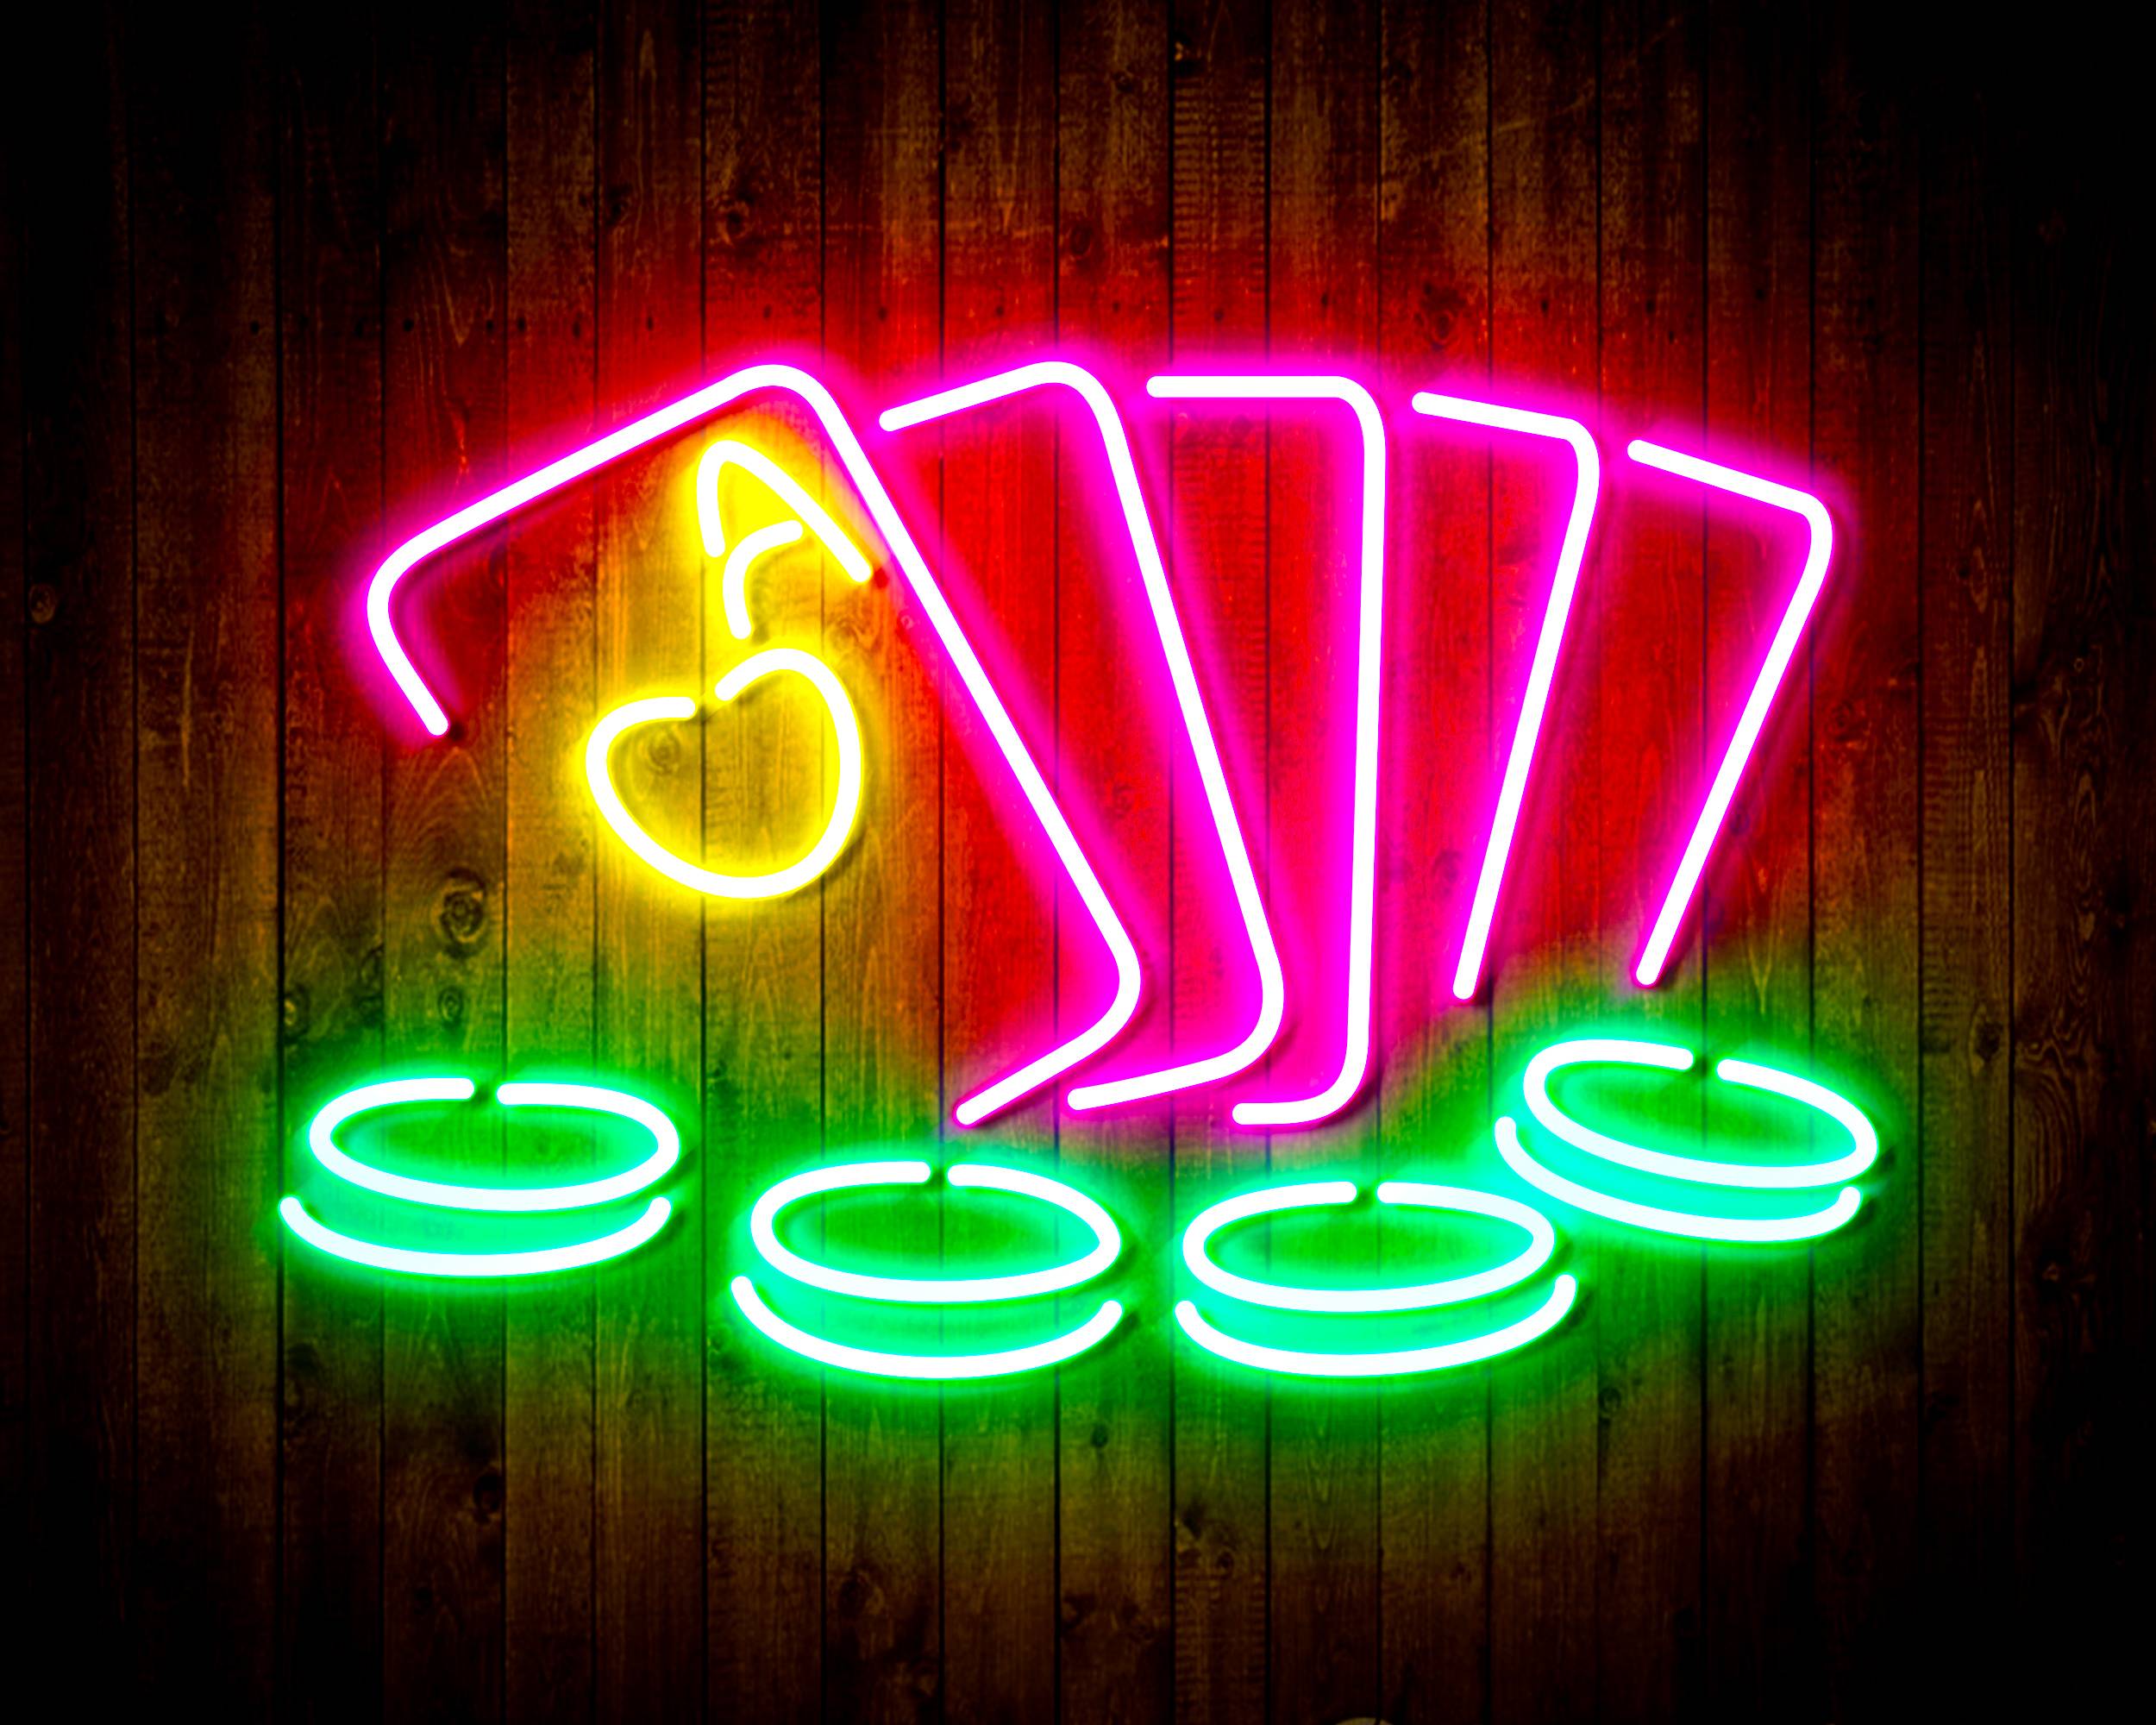 Cards with Coins for Crown Royal Handmade Neon Flex LED Sign